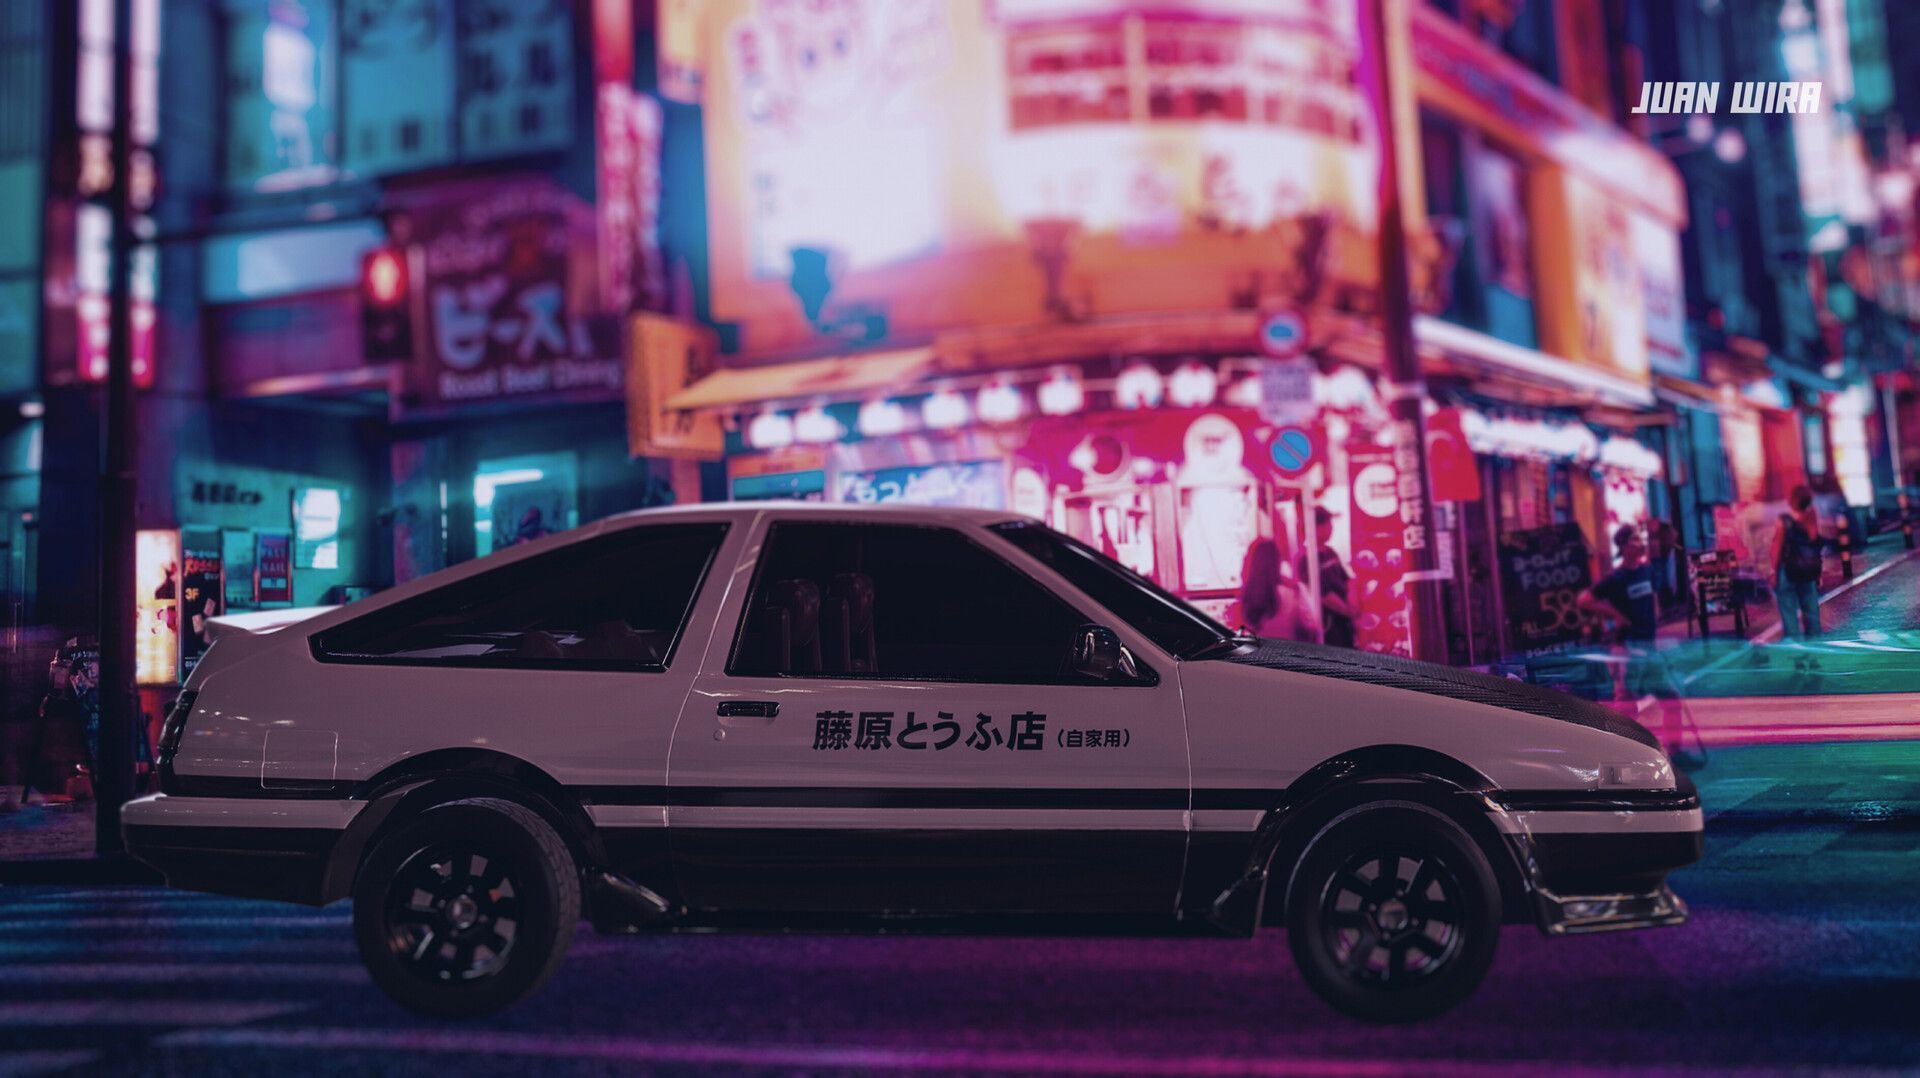 A car is parked on the street - Toyota AE86